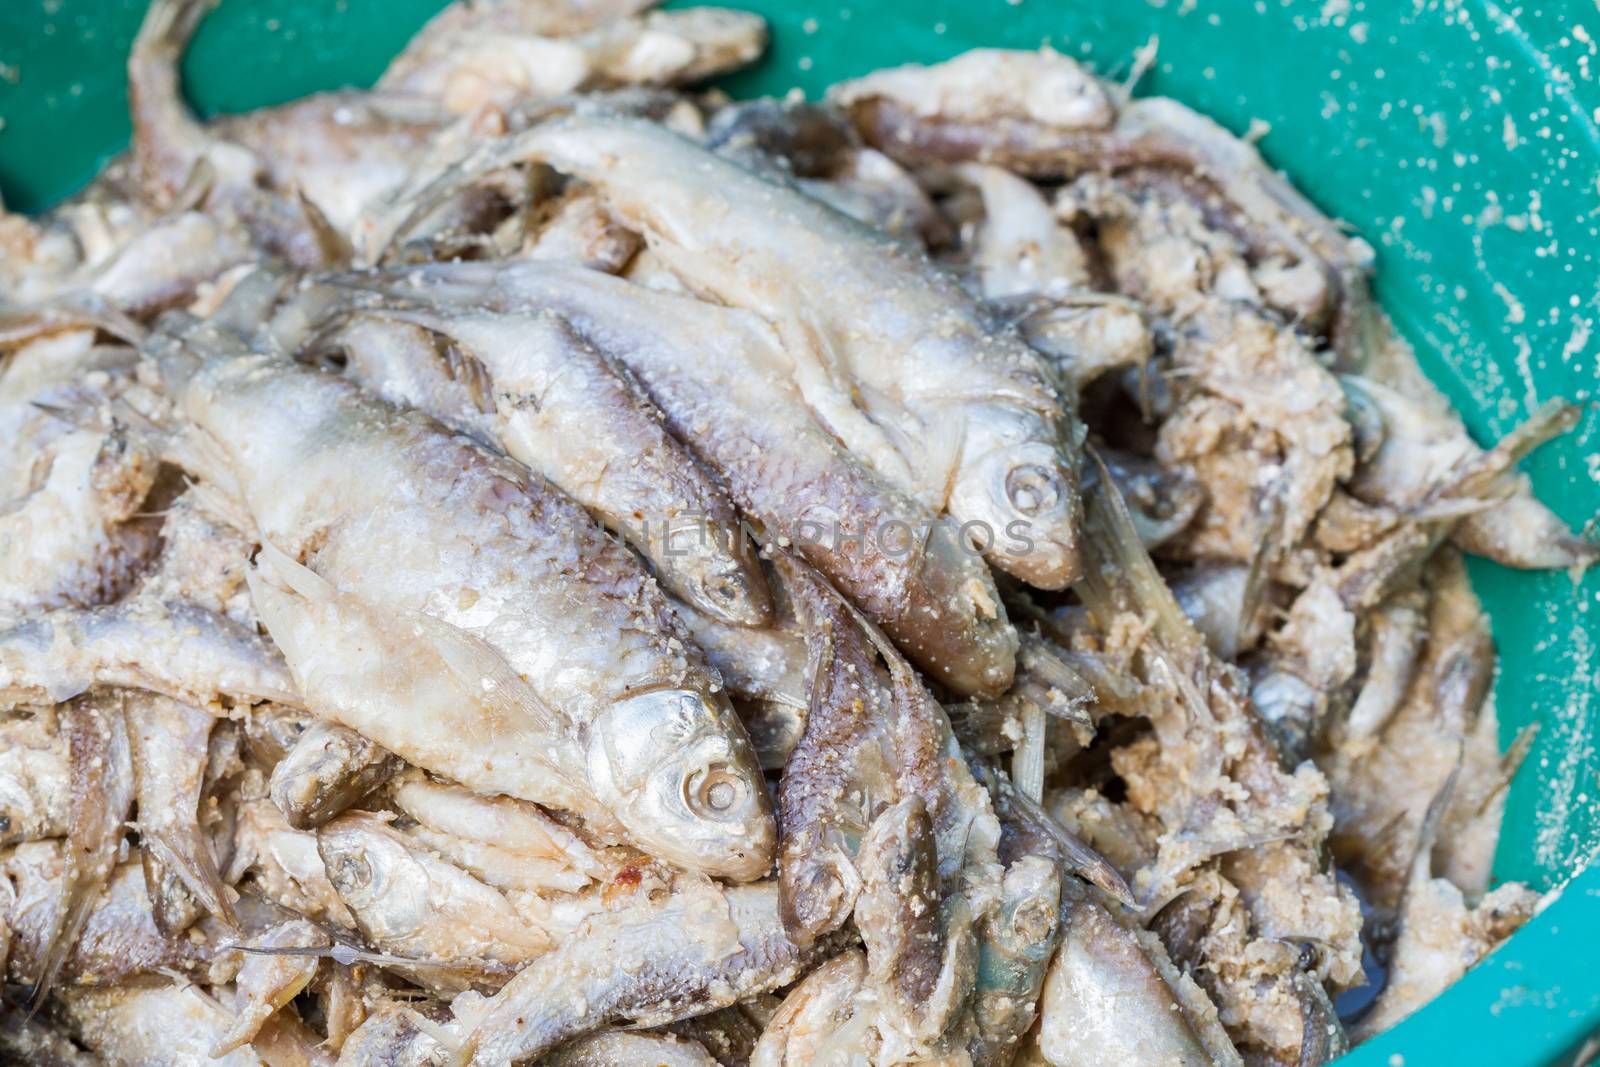 food - closed up stinking fermented fish